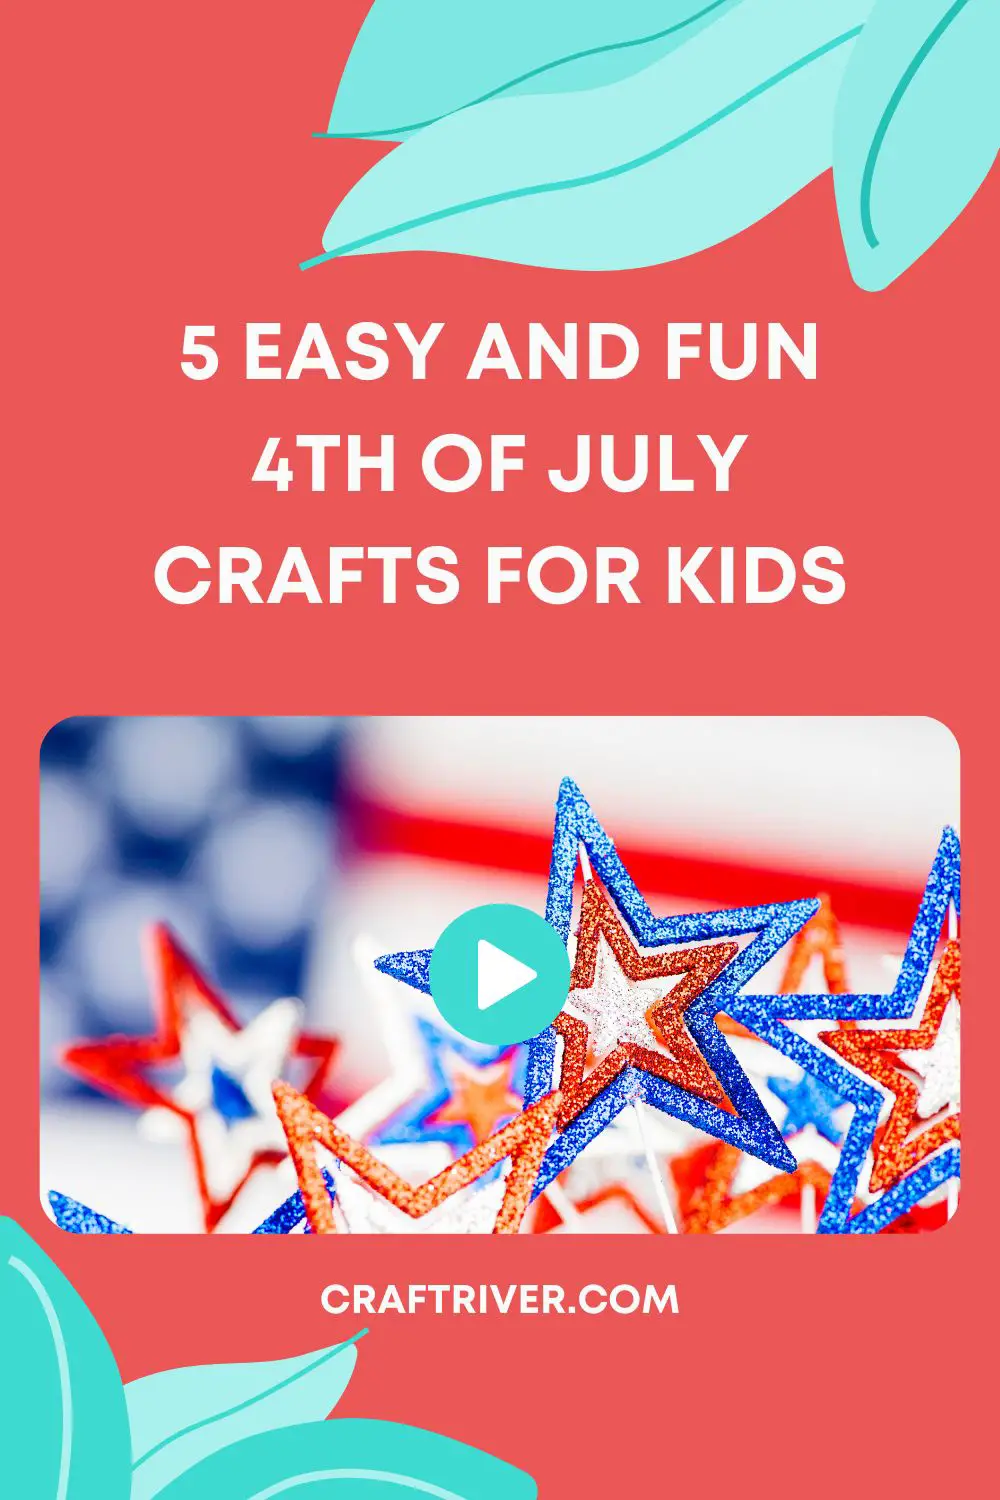 5 Easy and Fun 4th of July Crafts For Kids